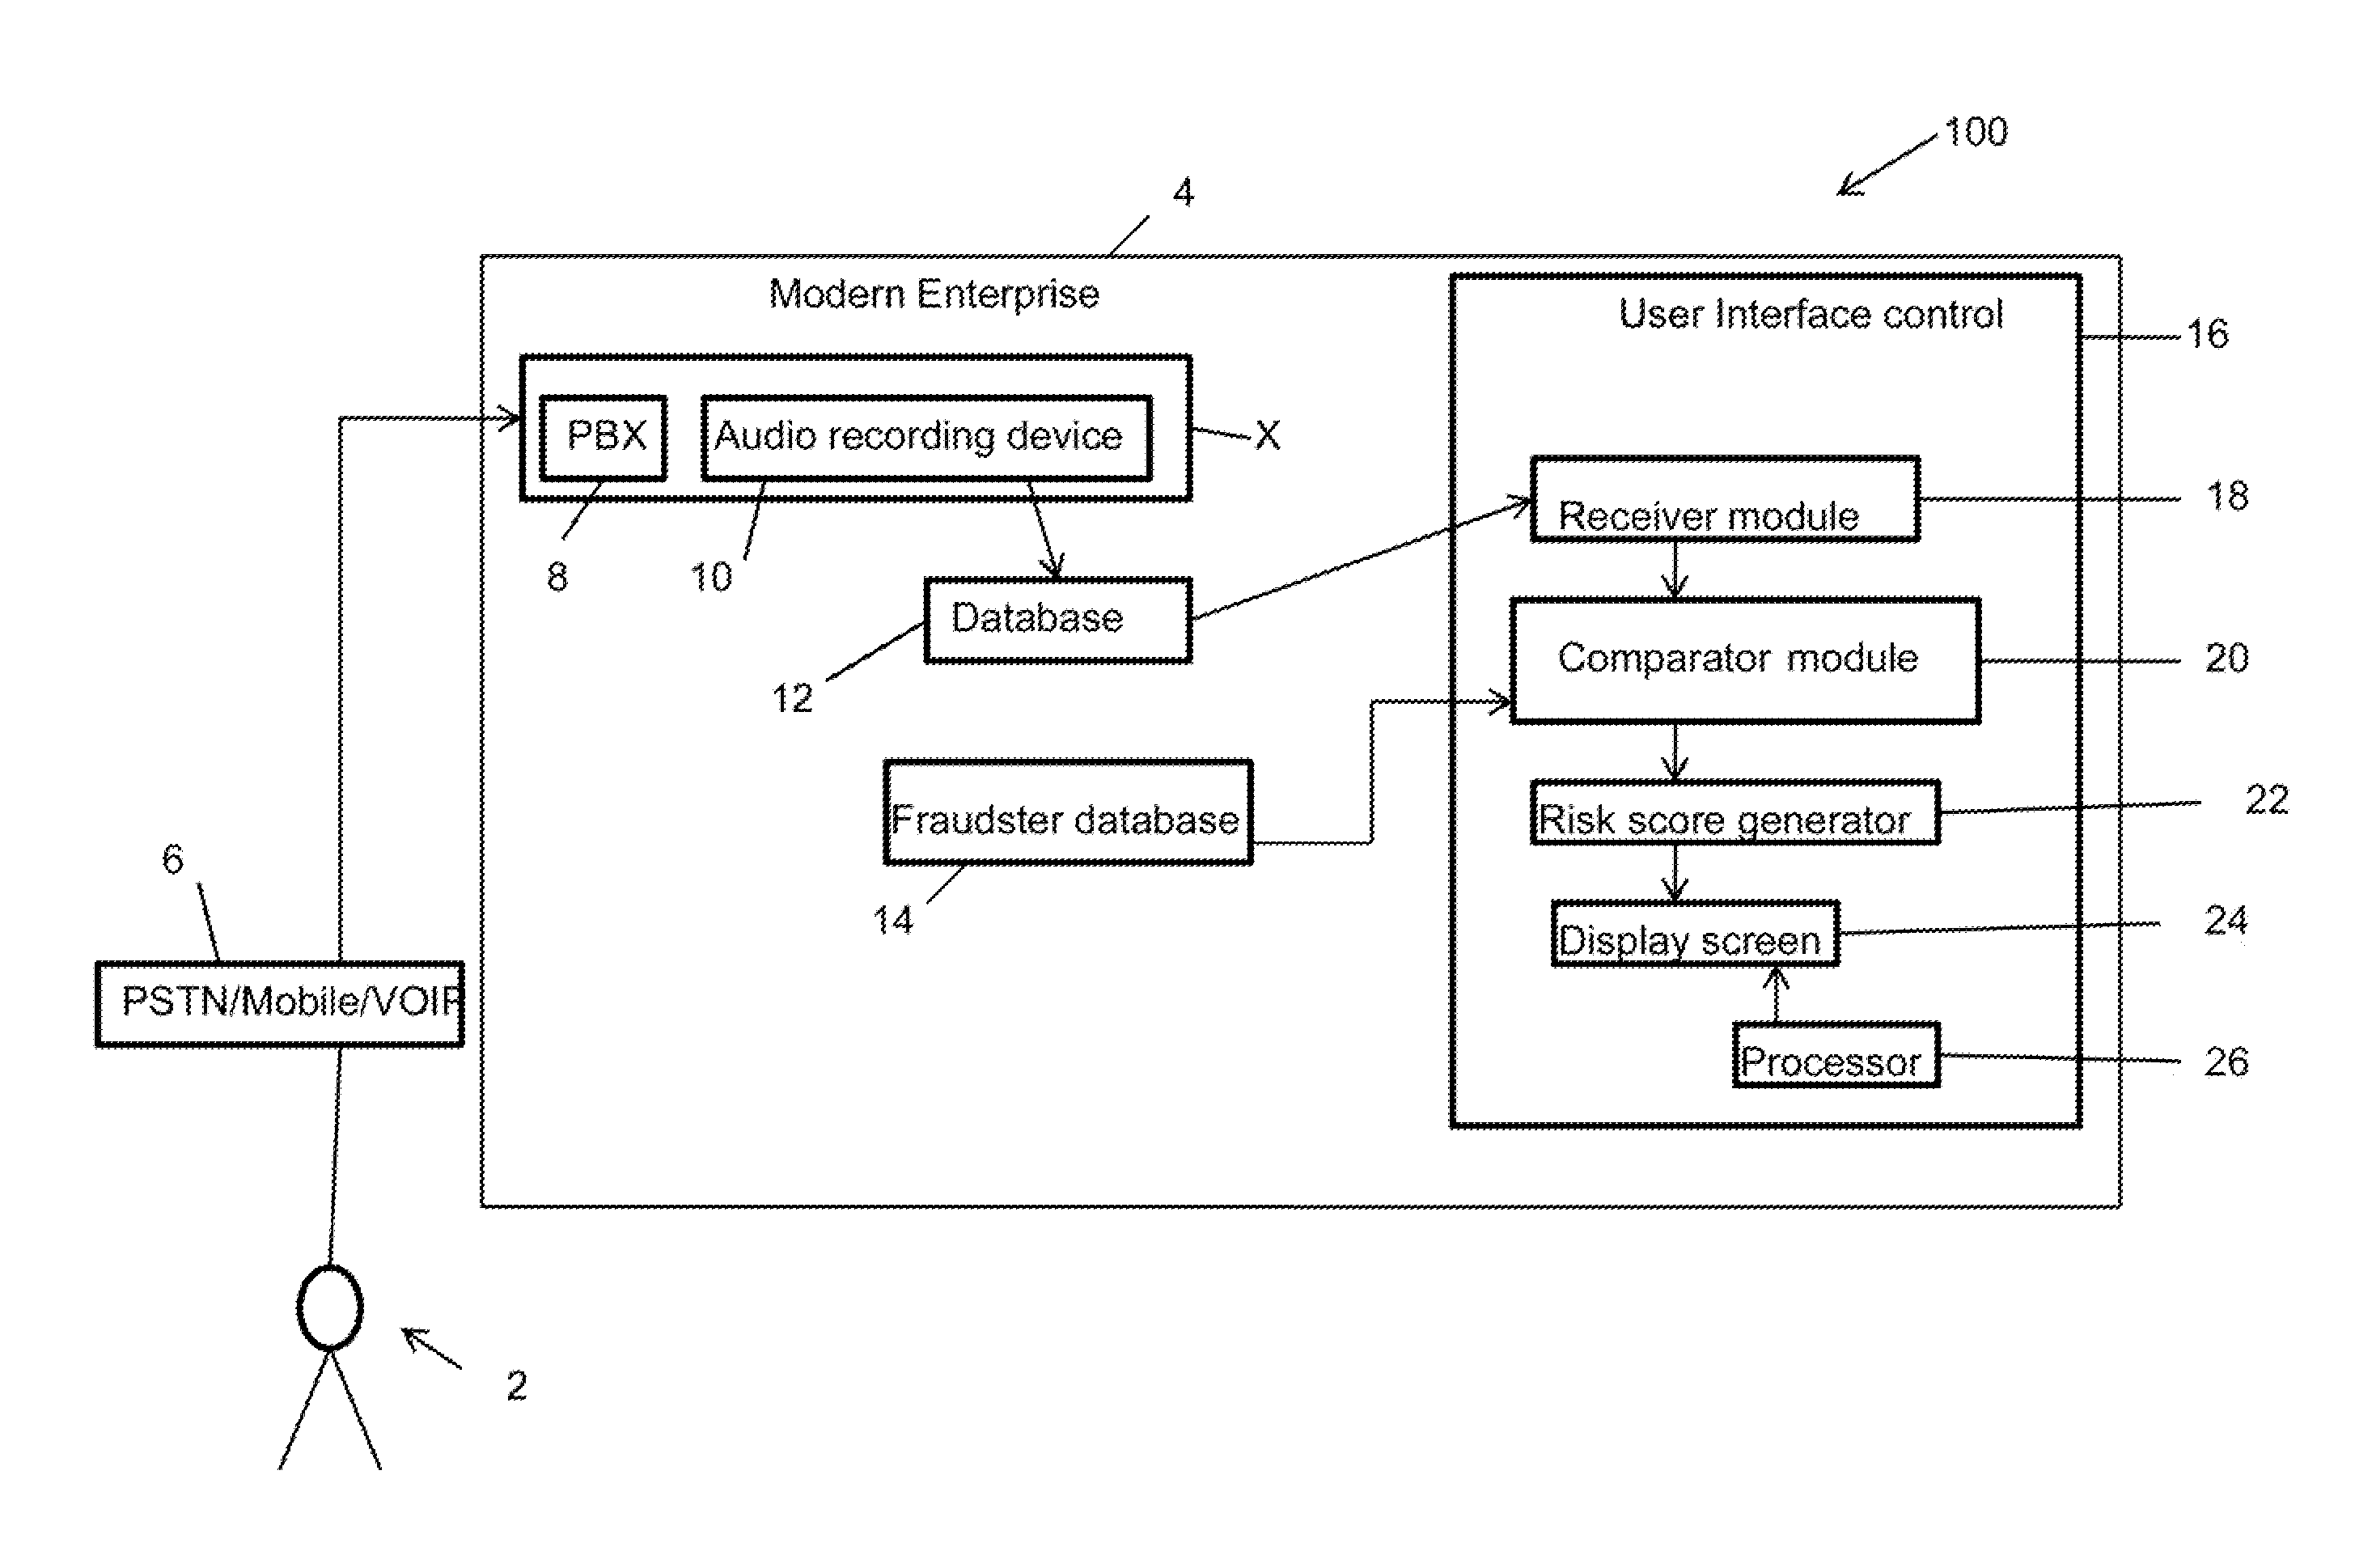 Speaker verification-based fraud system for combined automated risk score with agent review and associated user interface